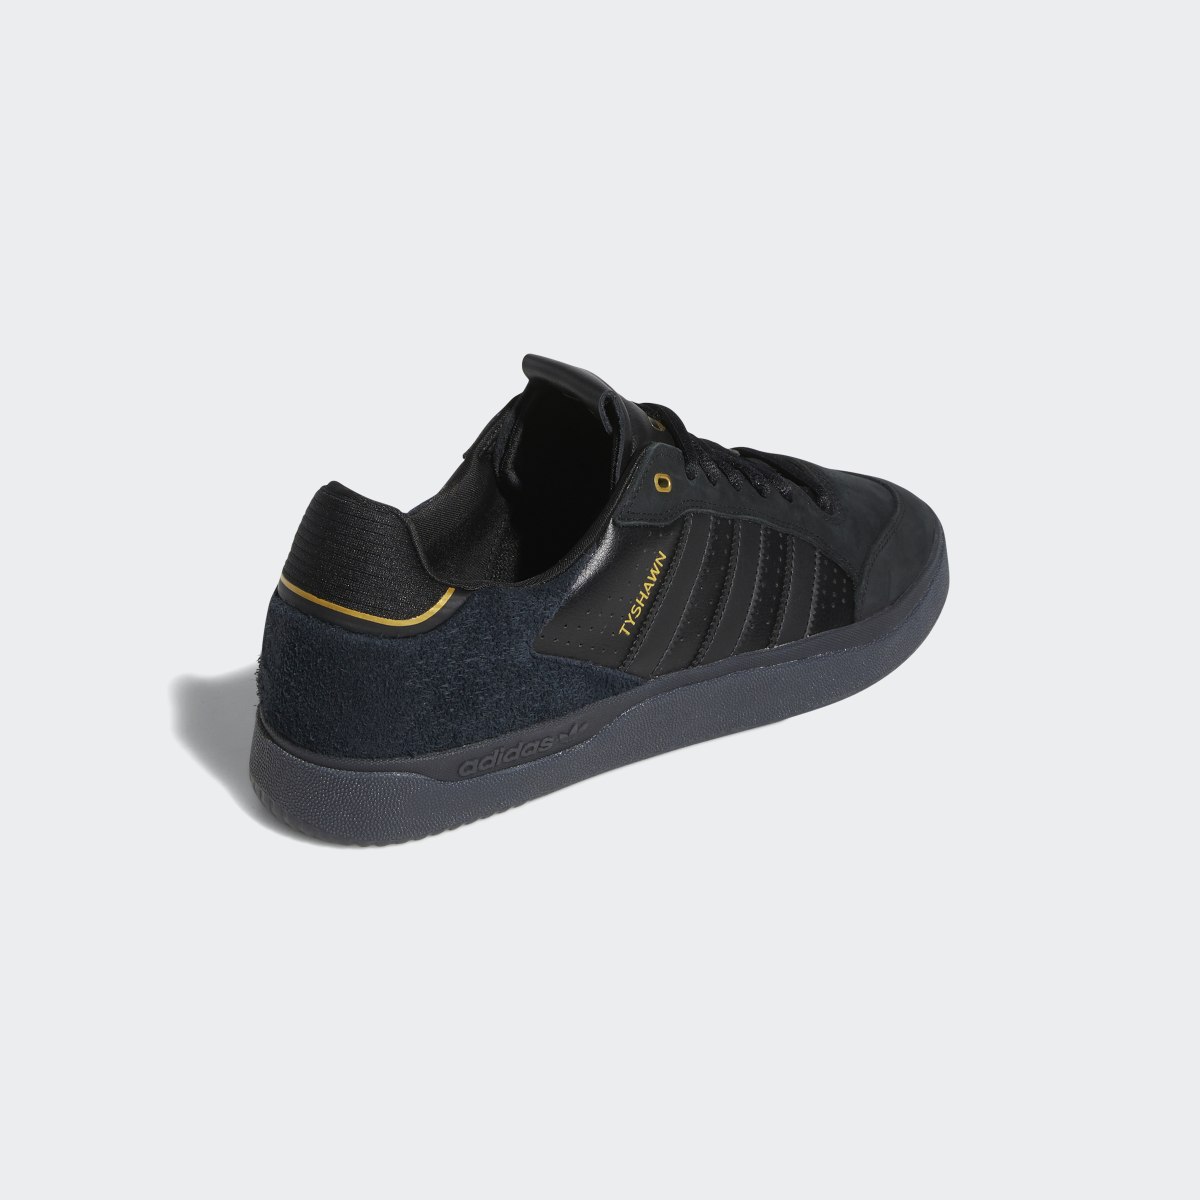 Adidas Tyshawn Low Shoes. 6